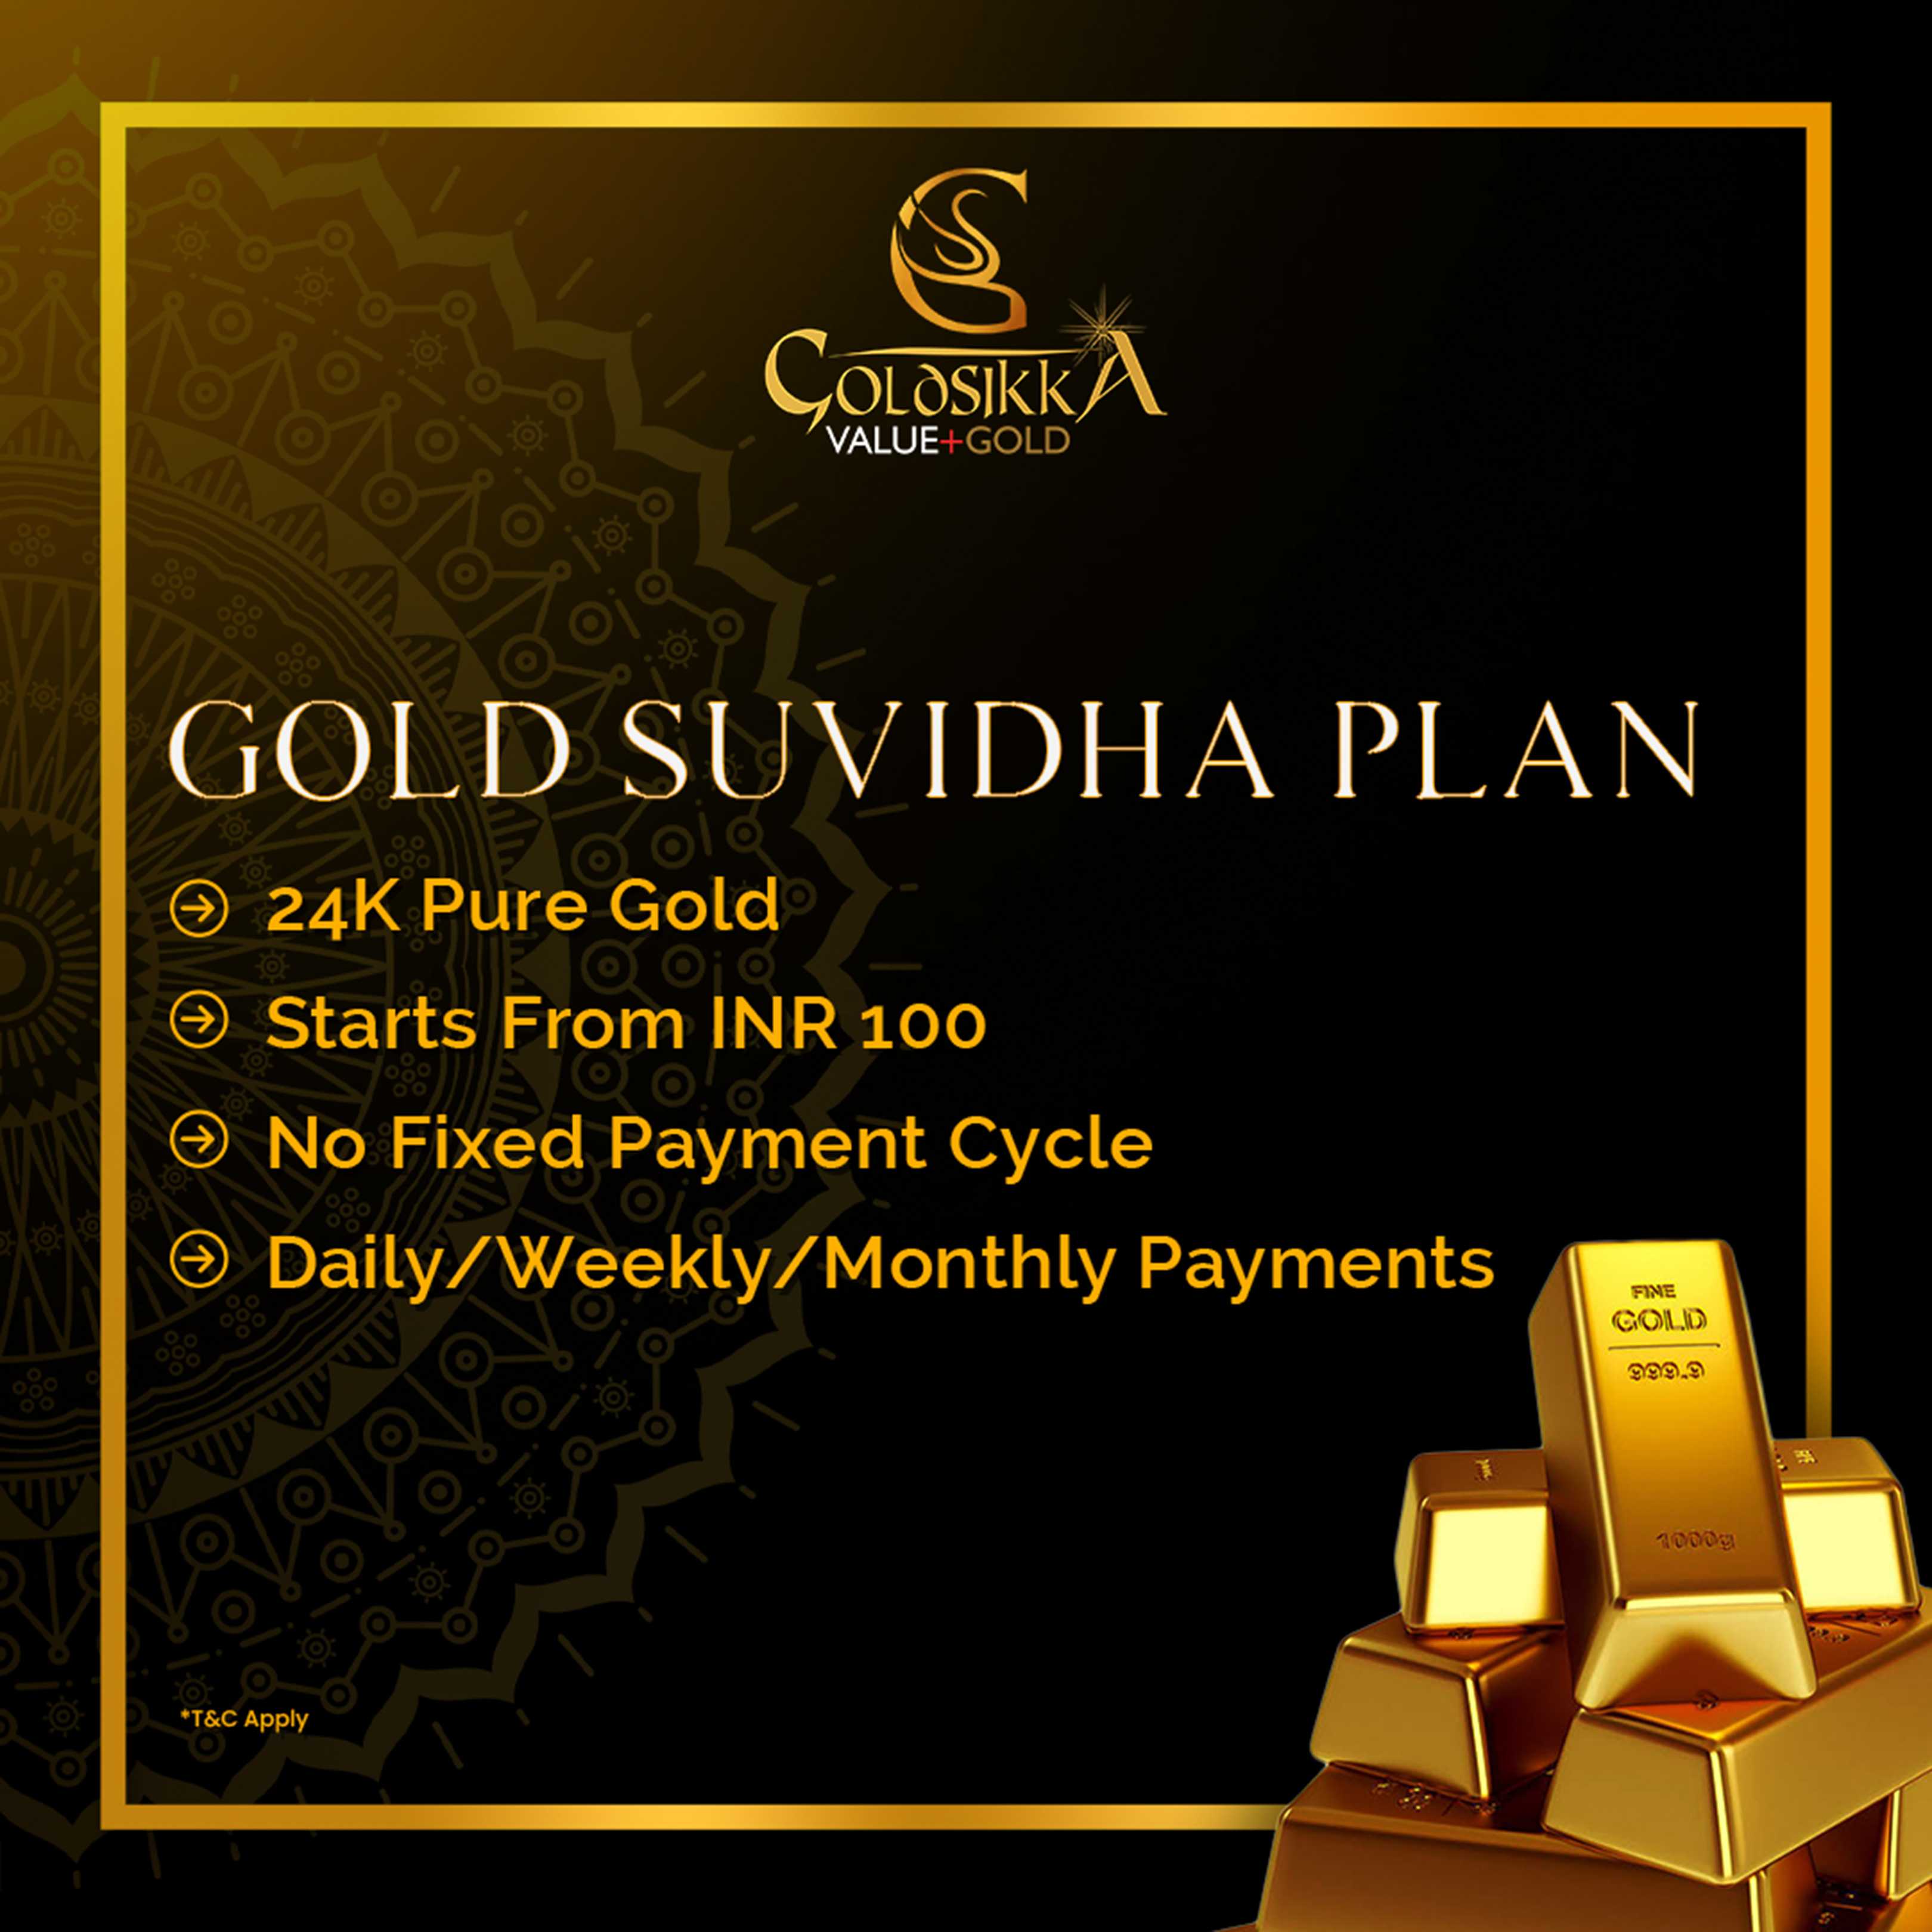 Gold Scheme for a Prosperous RetirementBuy and SellJewelryNoidaAghapur